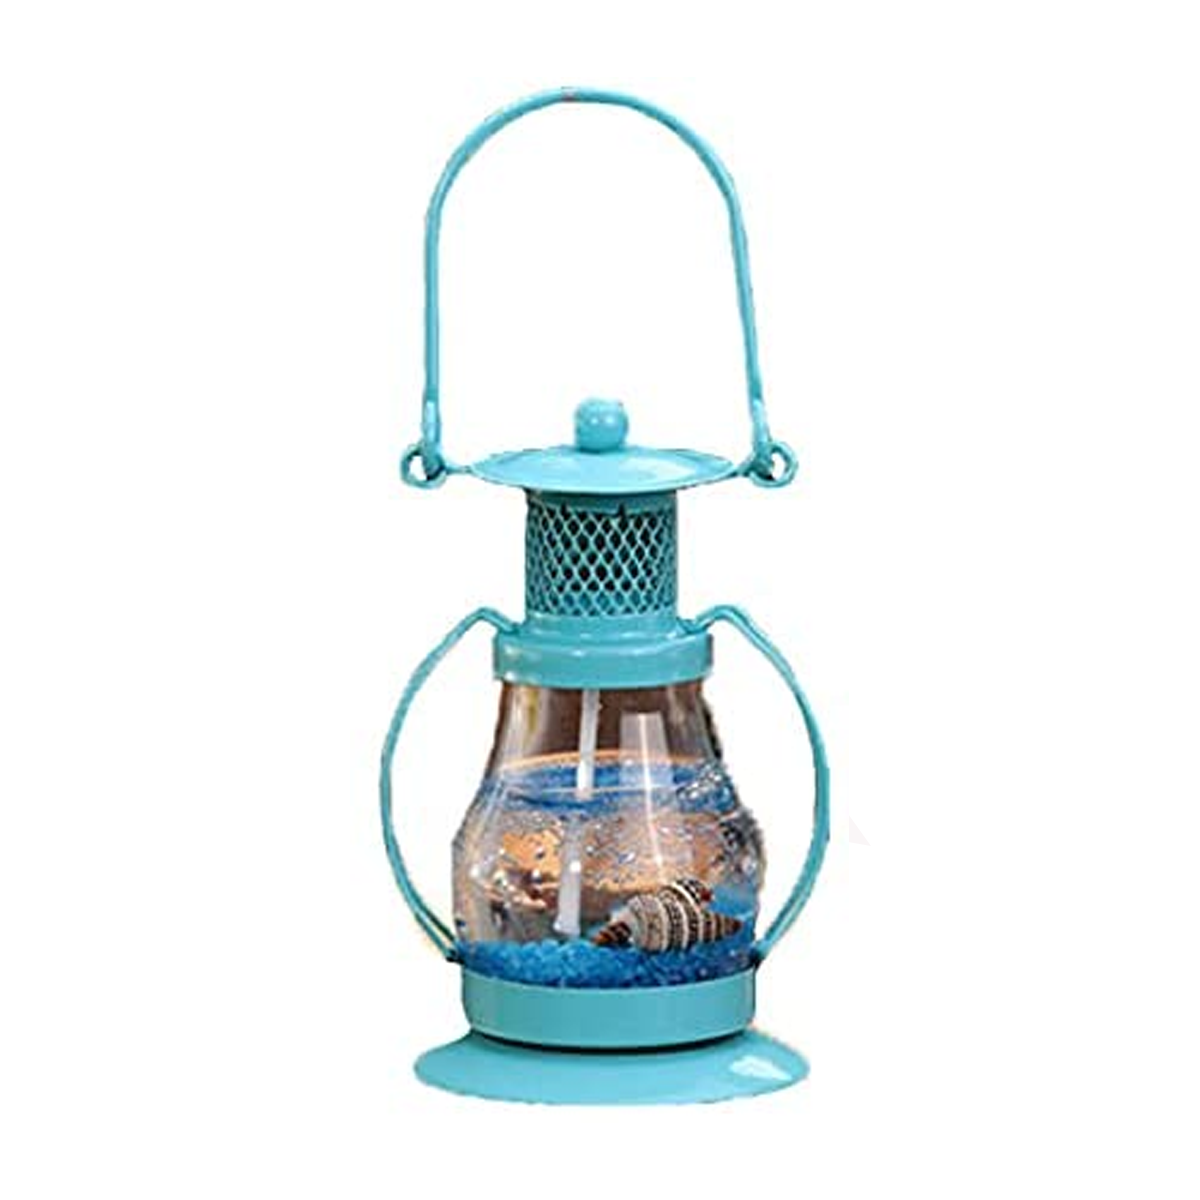 12pcs Small Hanging Lantern With Candle Mediterranean Style Mixed Assorted Colors Party Giveaway Gifts - 8cm Height